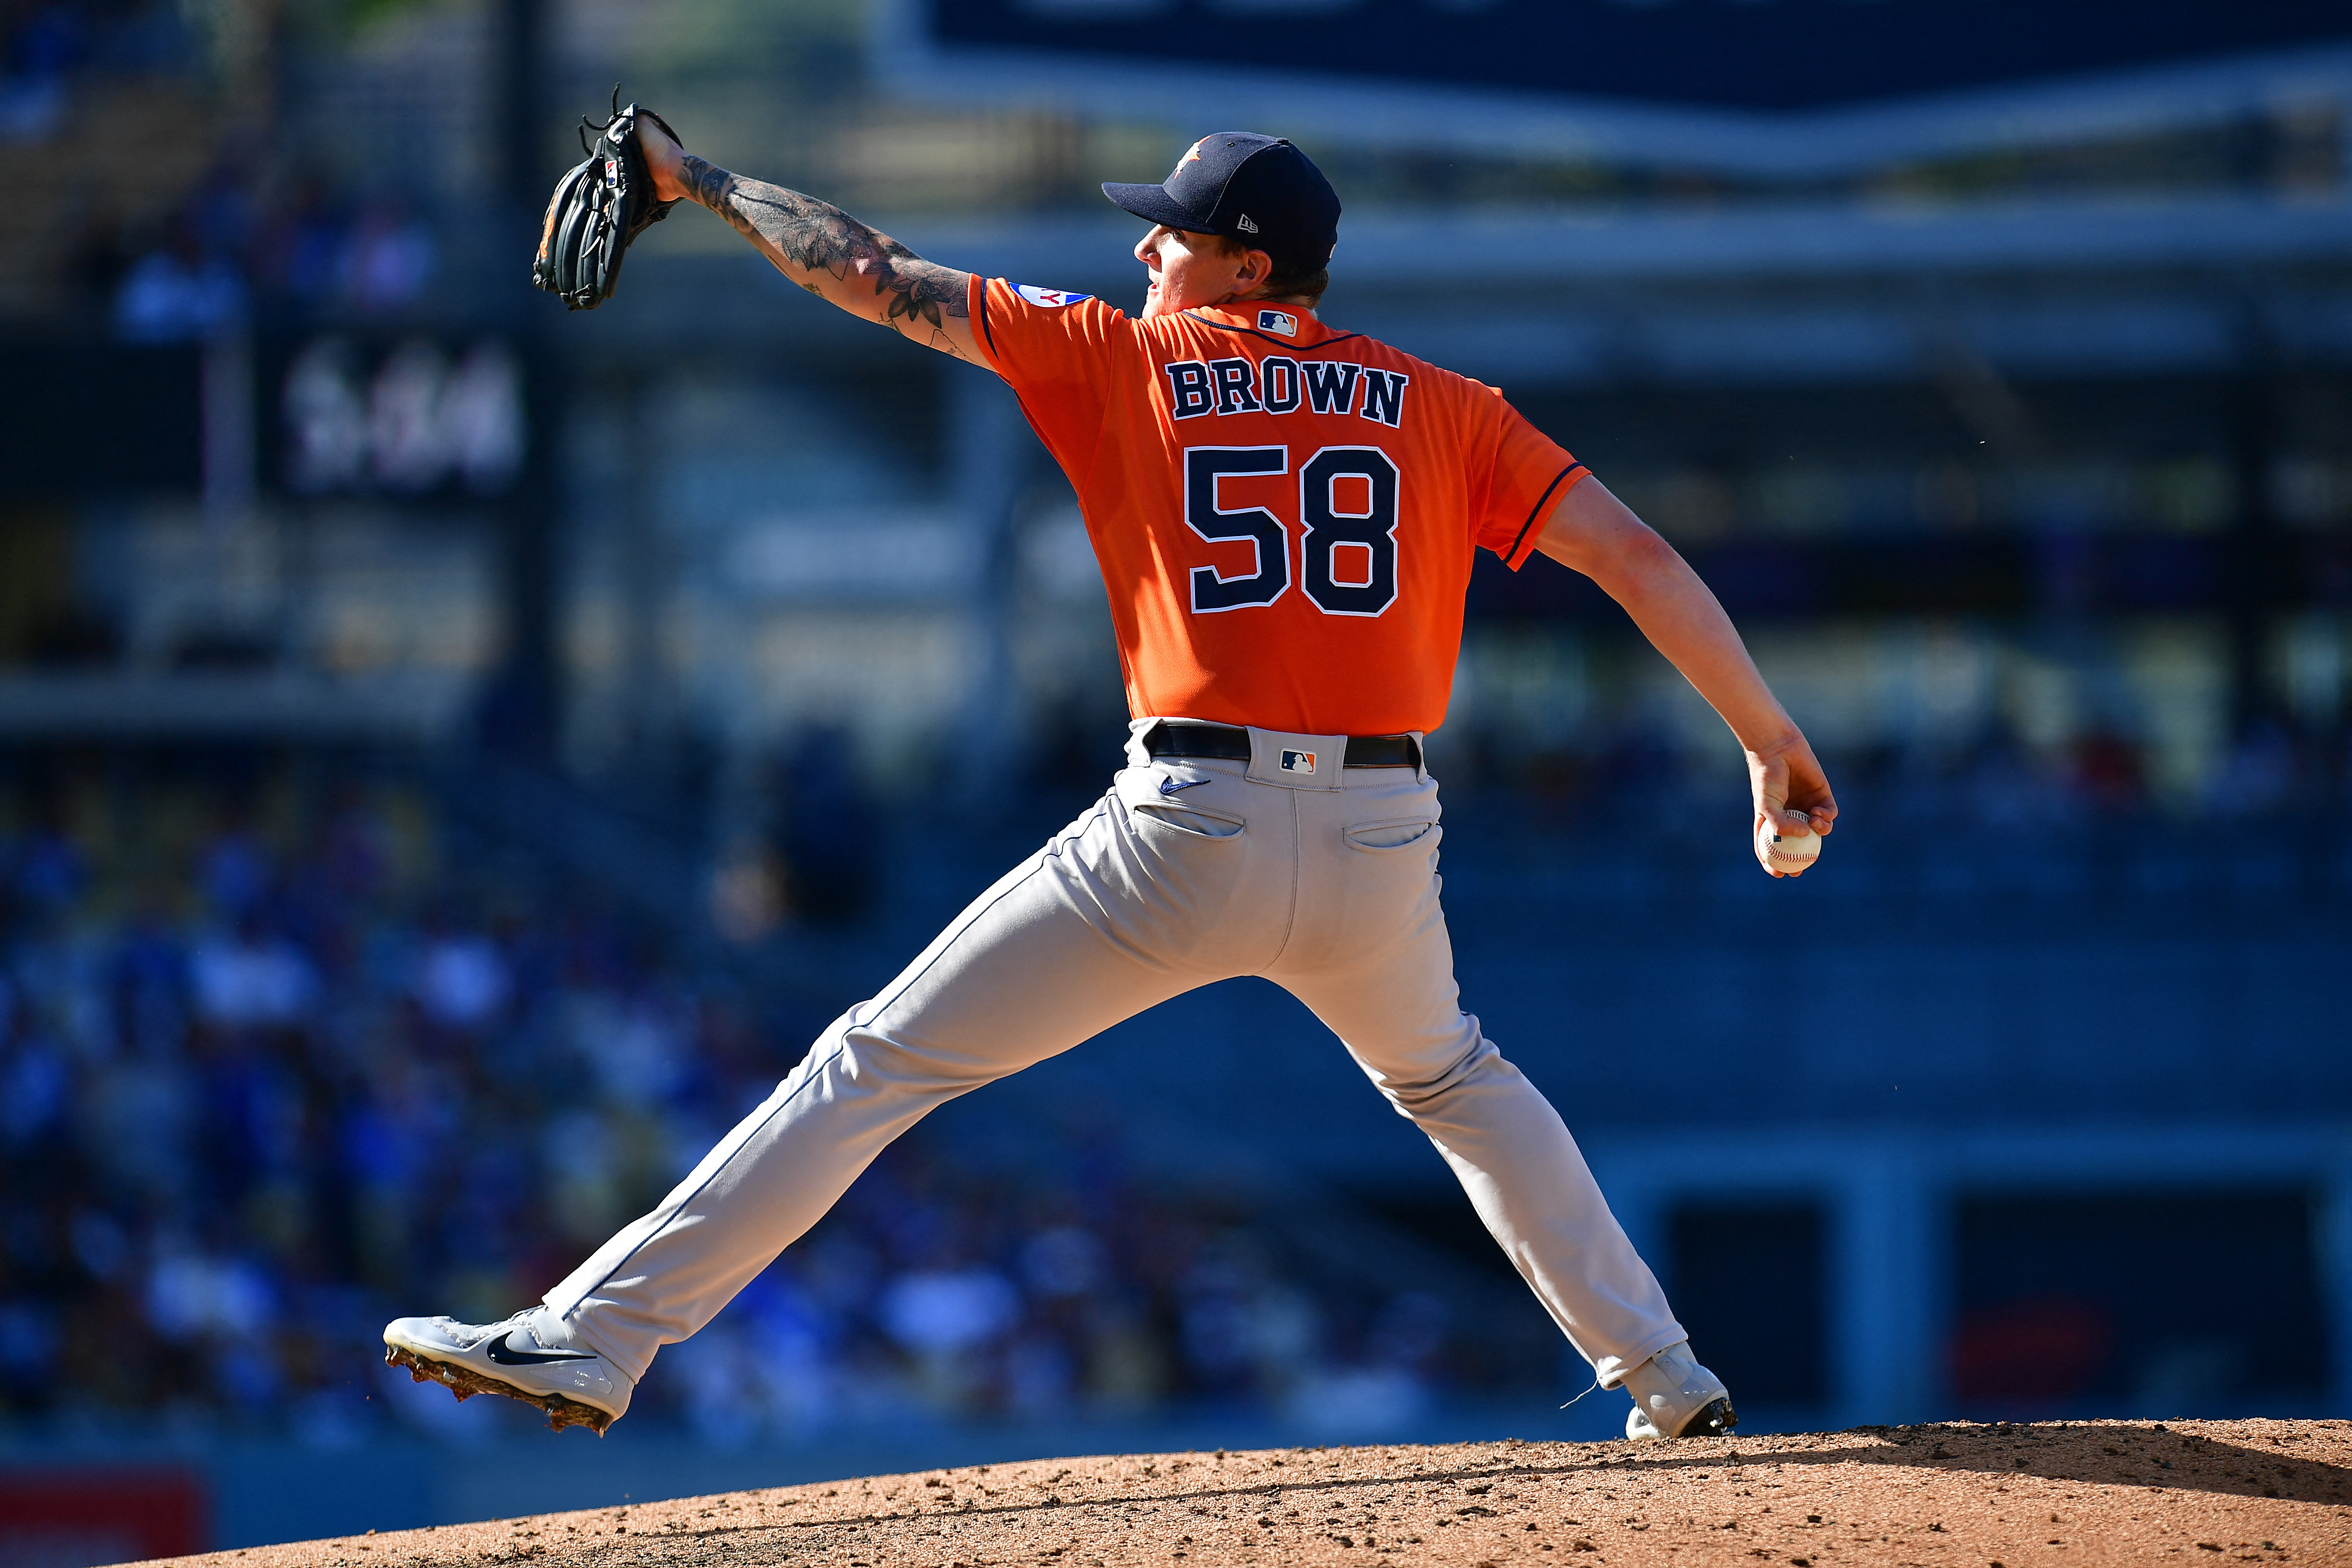 Astros rookie Hunter Brown shines in strong outing at Yankee